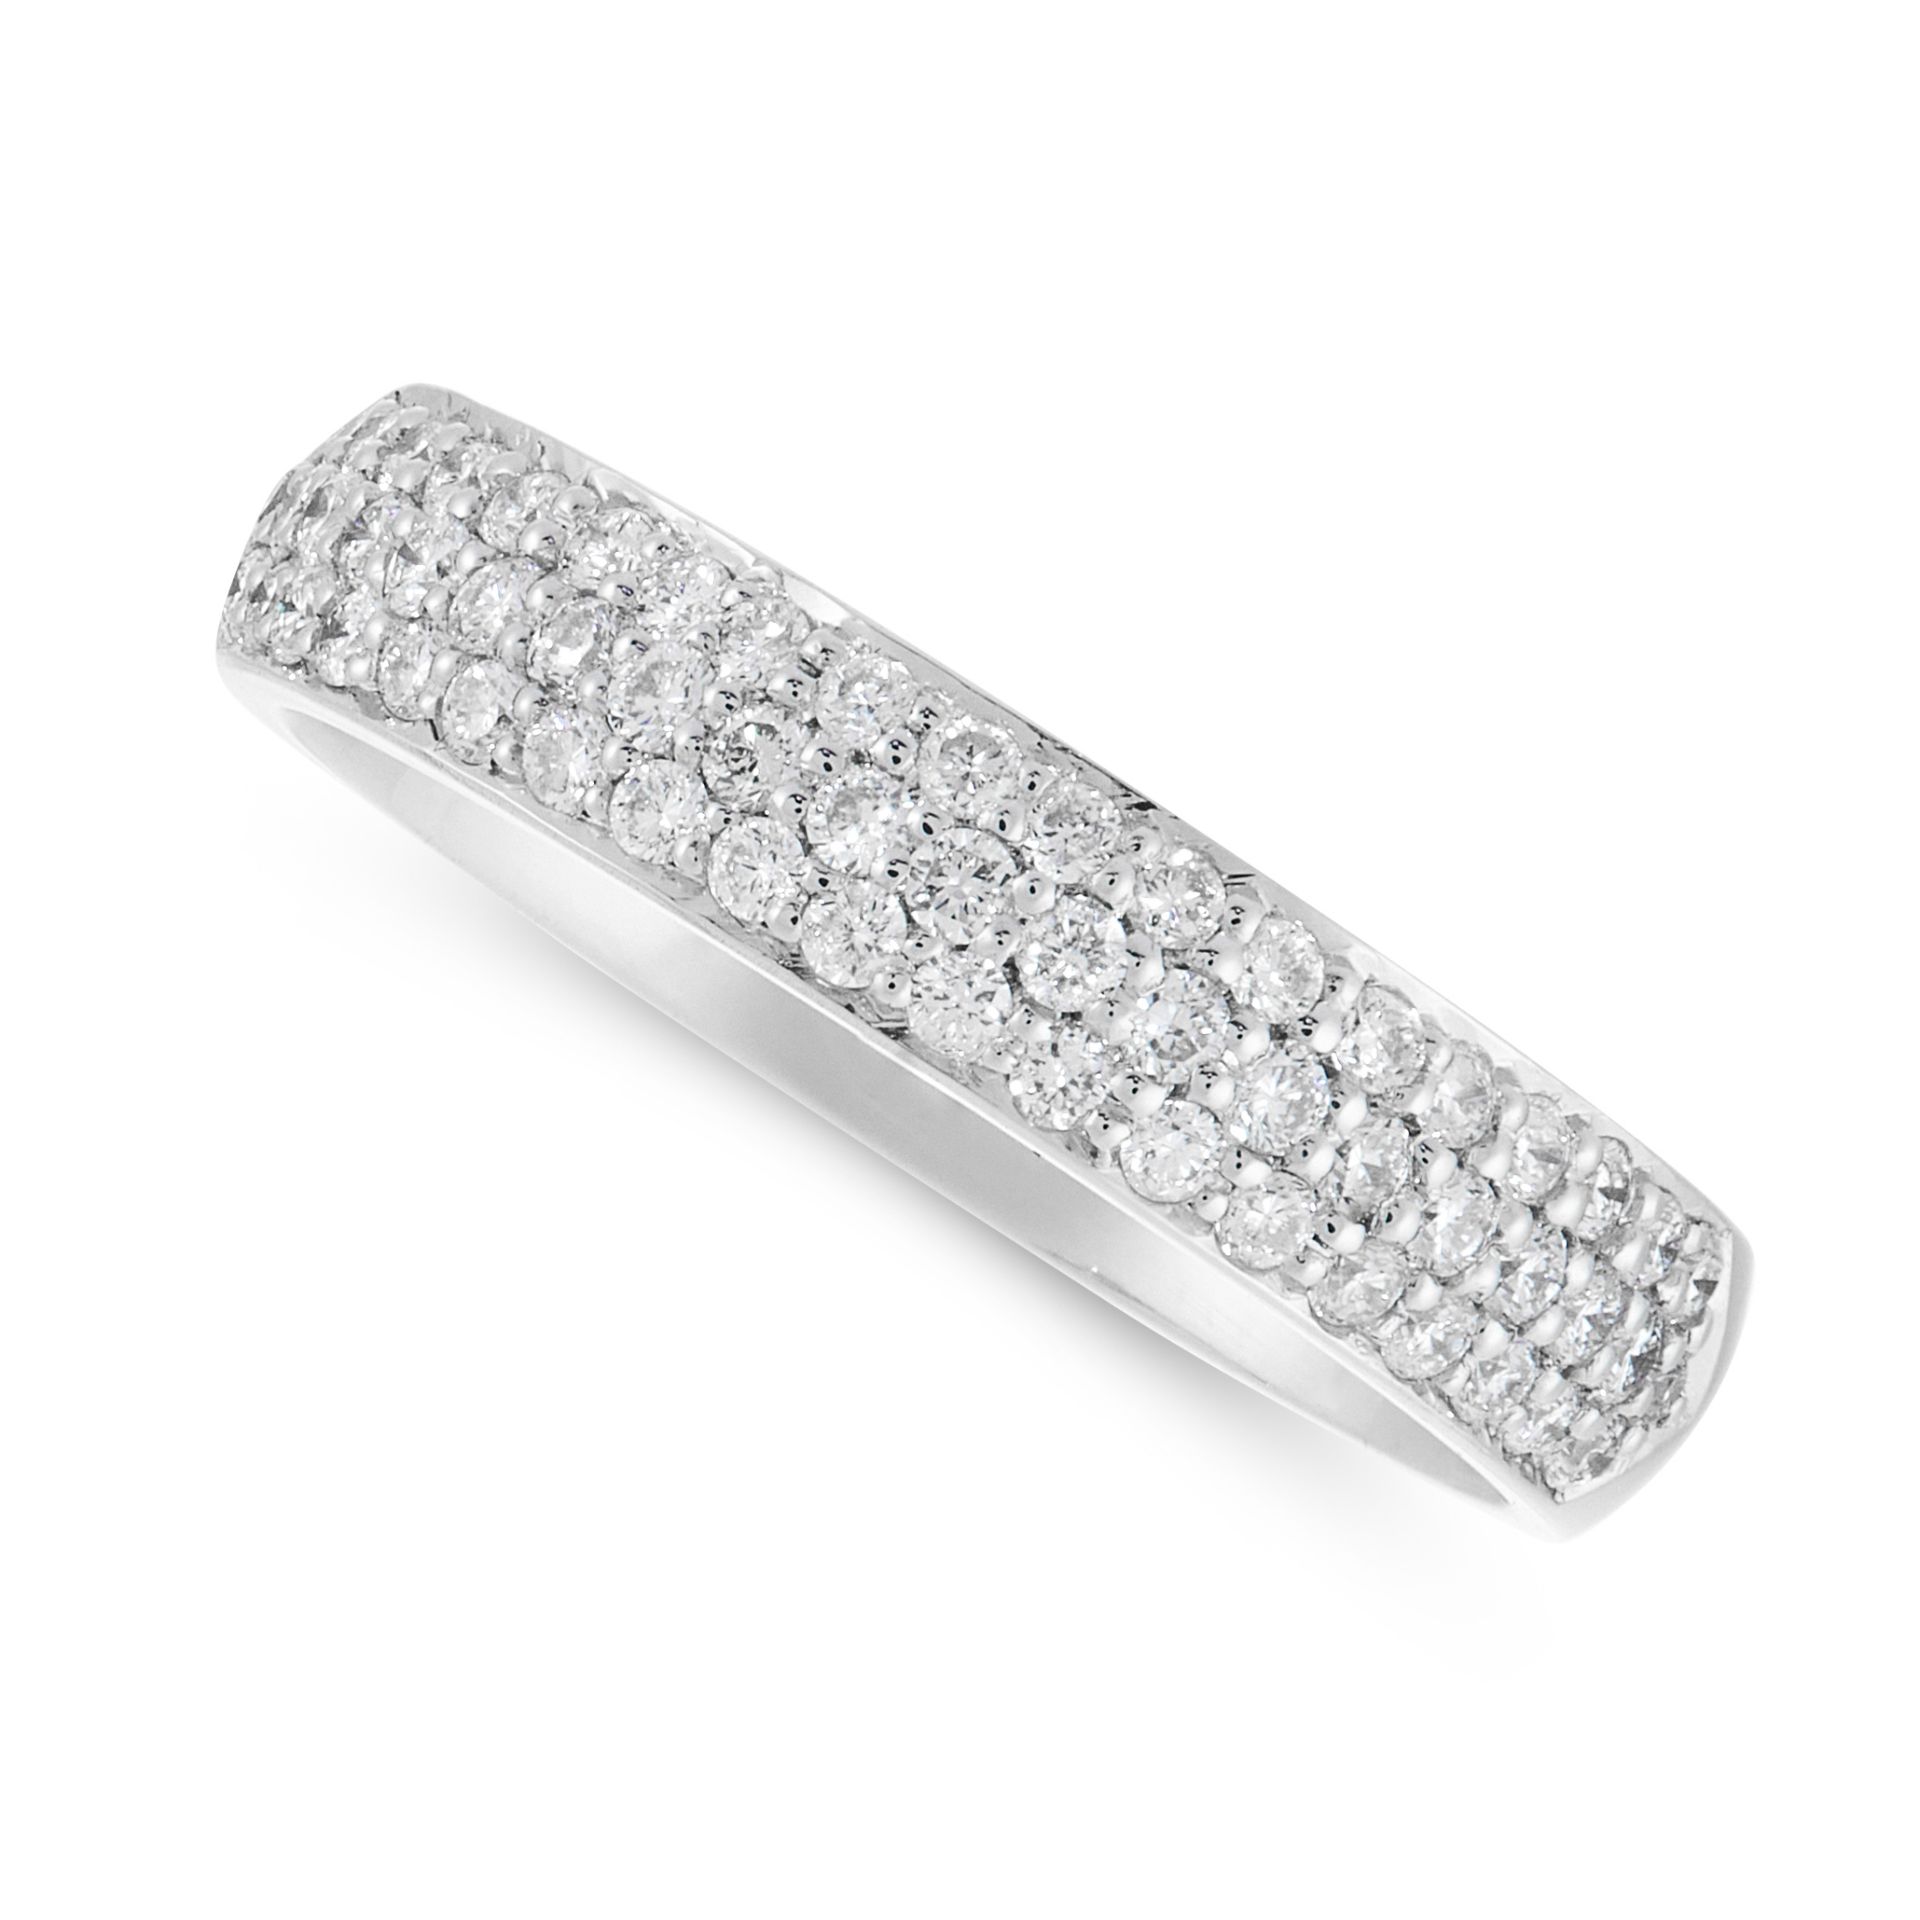 A DIAMOND BAND RING in platinum, the band is half set with three rows of round cut diamonds, stamped